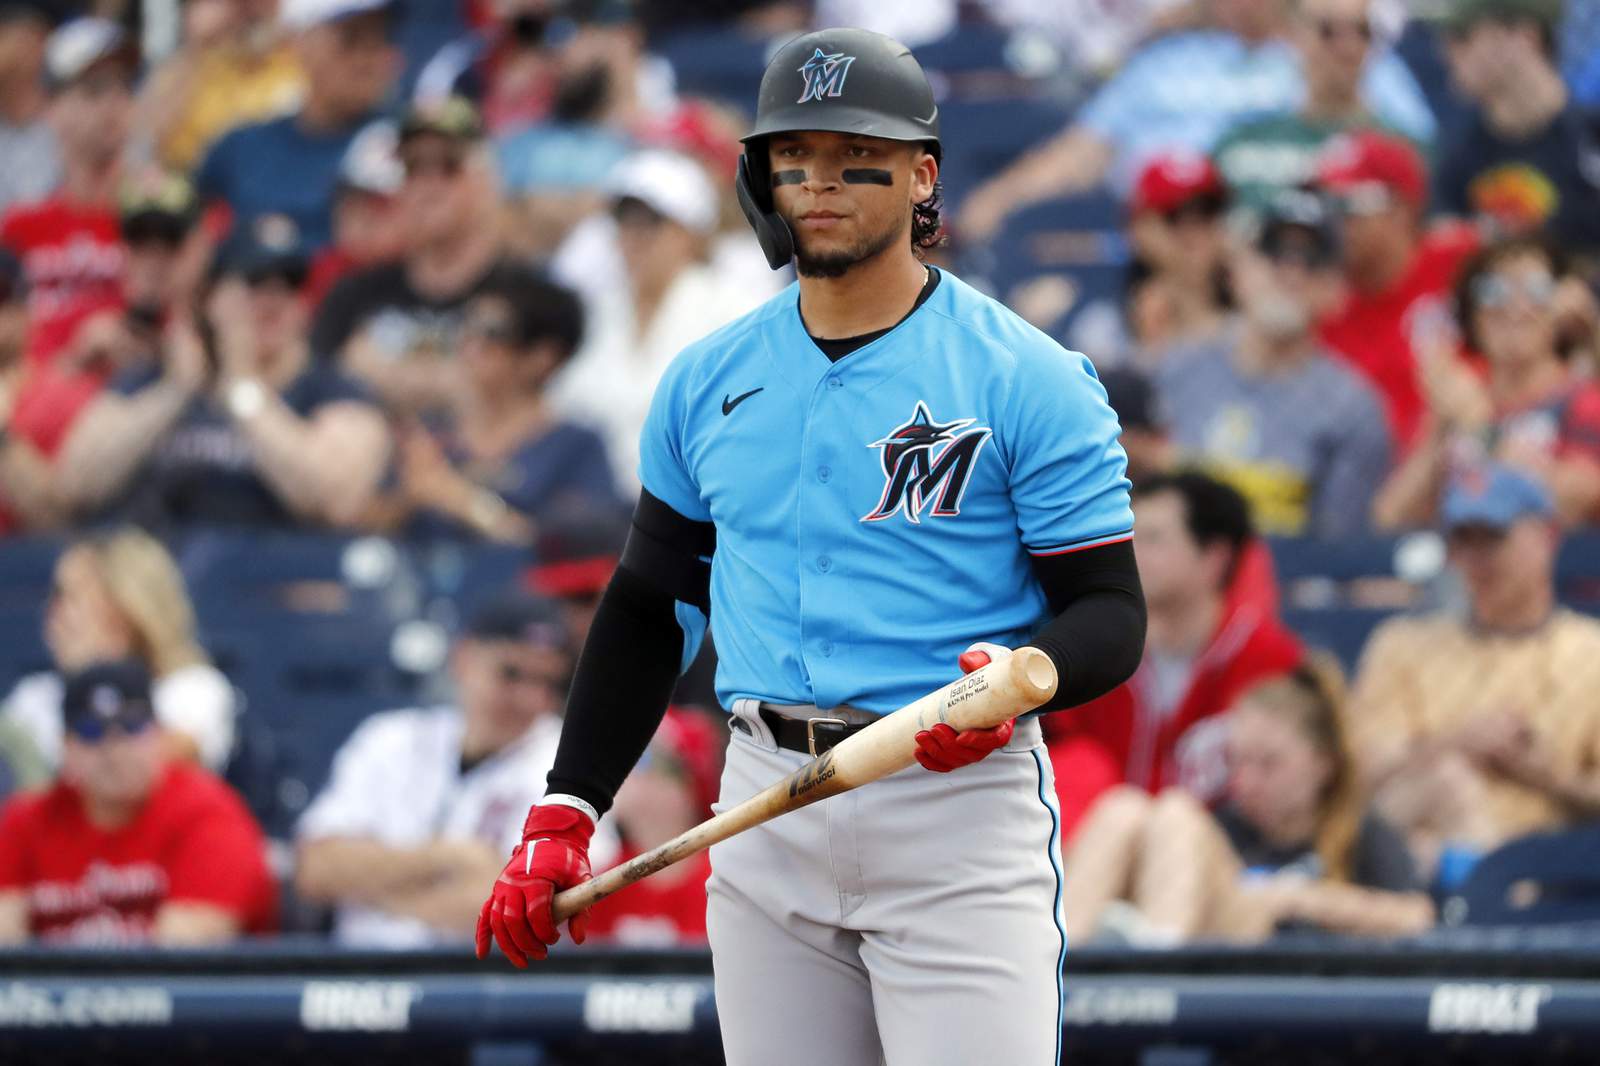 No new positives for Marlins, Phils; 2B Isan Diaz opts out